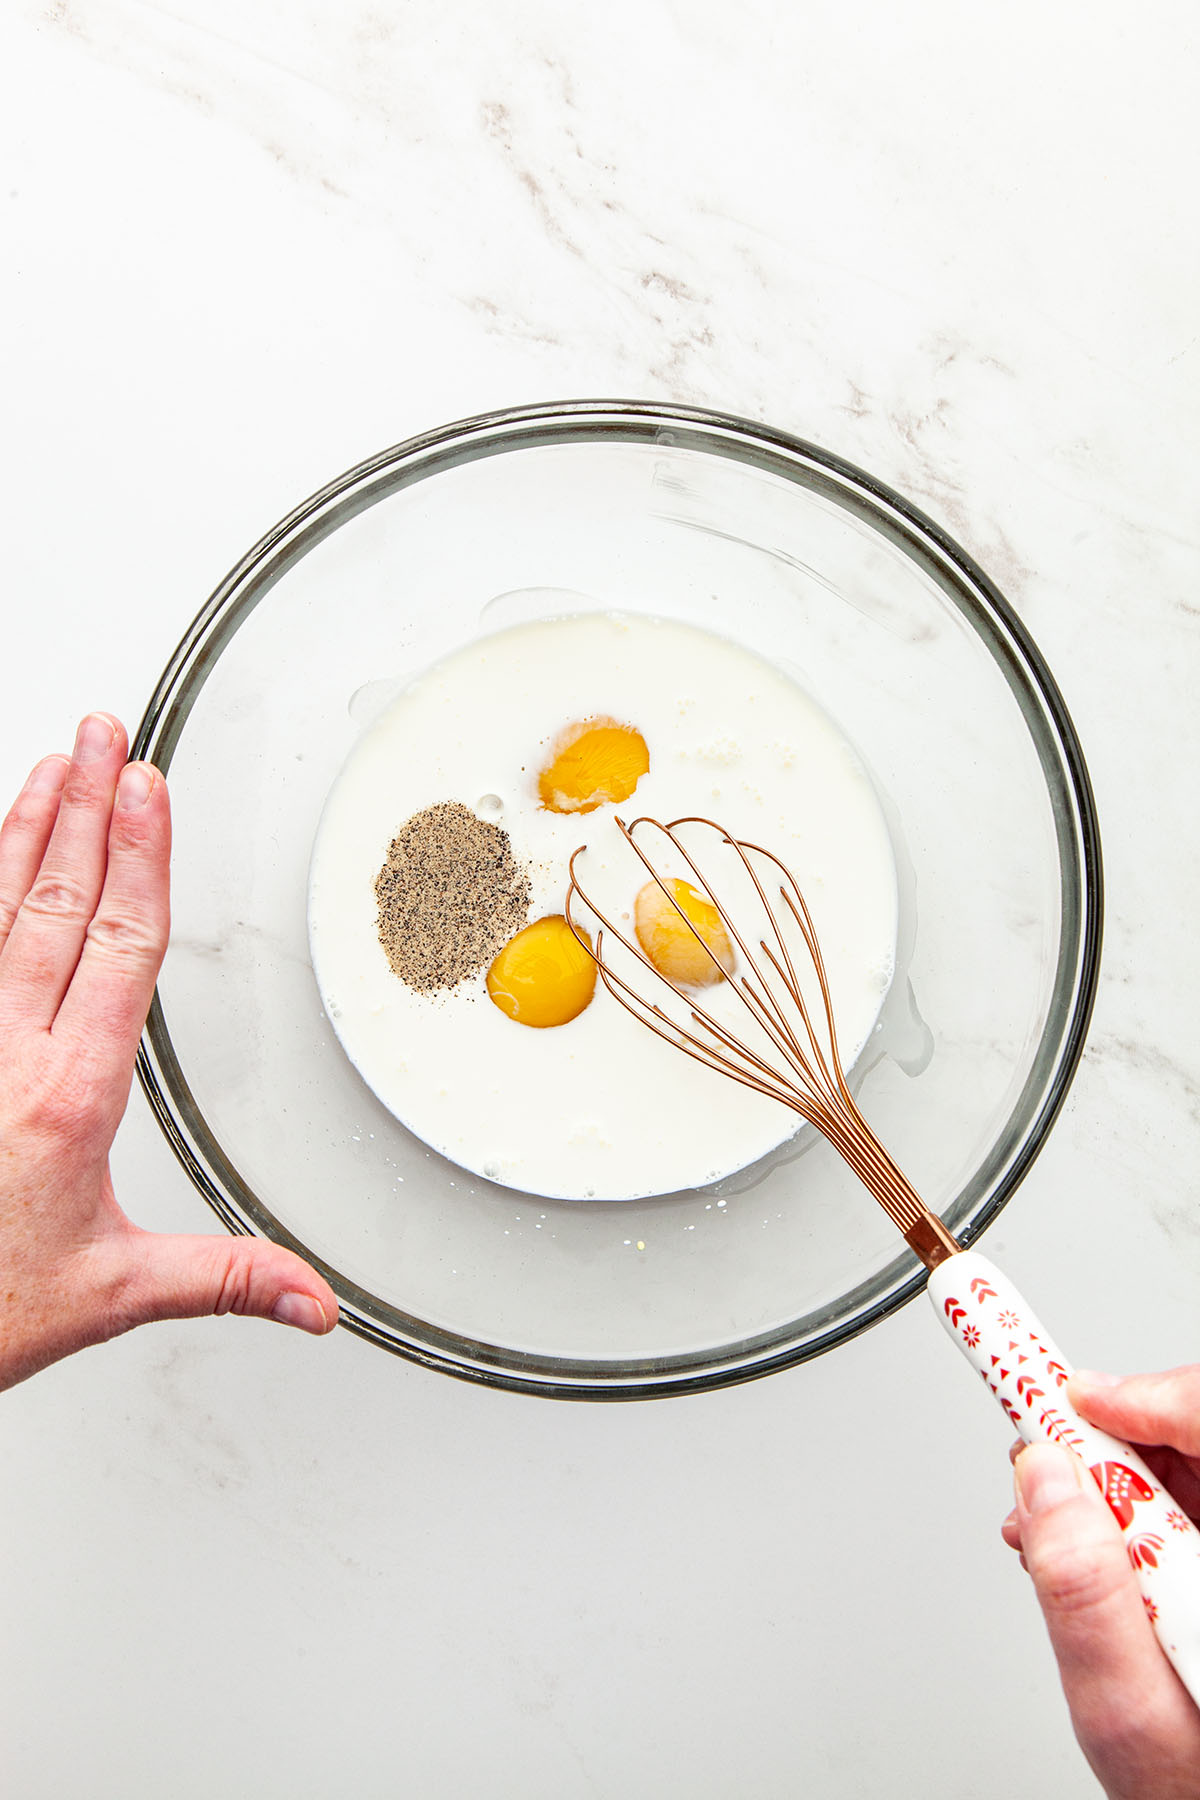 Hands using a whisk to mix eggs, cream, milk, salt, pepper, and Dijon mustard in a large glass bowl.